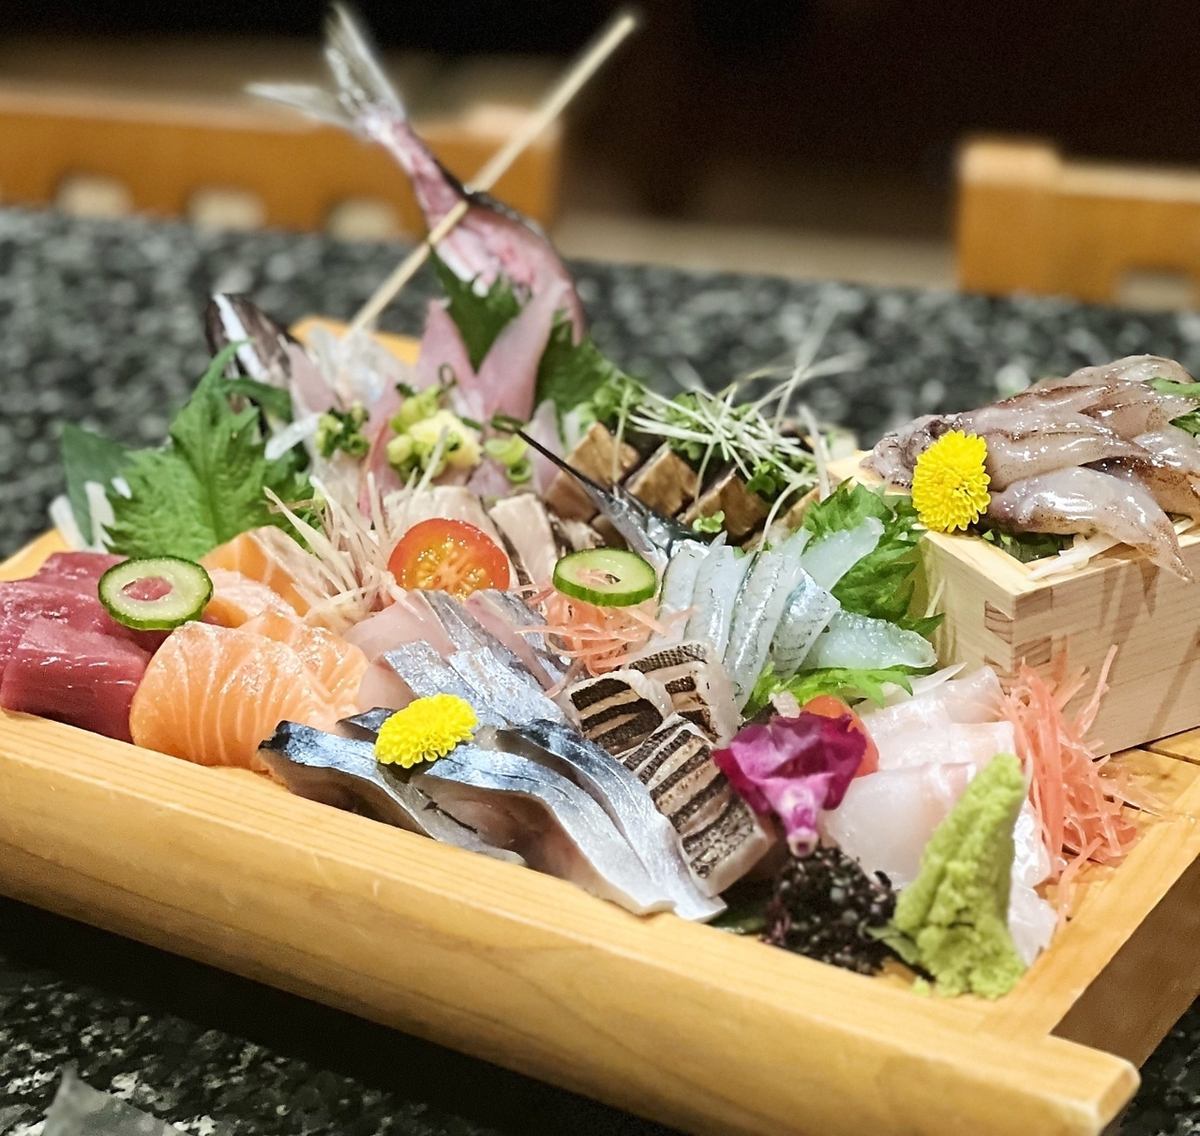 The owner's pride is the ikizukuri of fresh fish in a fish tank, and the taste and appearance are sure to please!